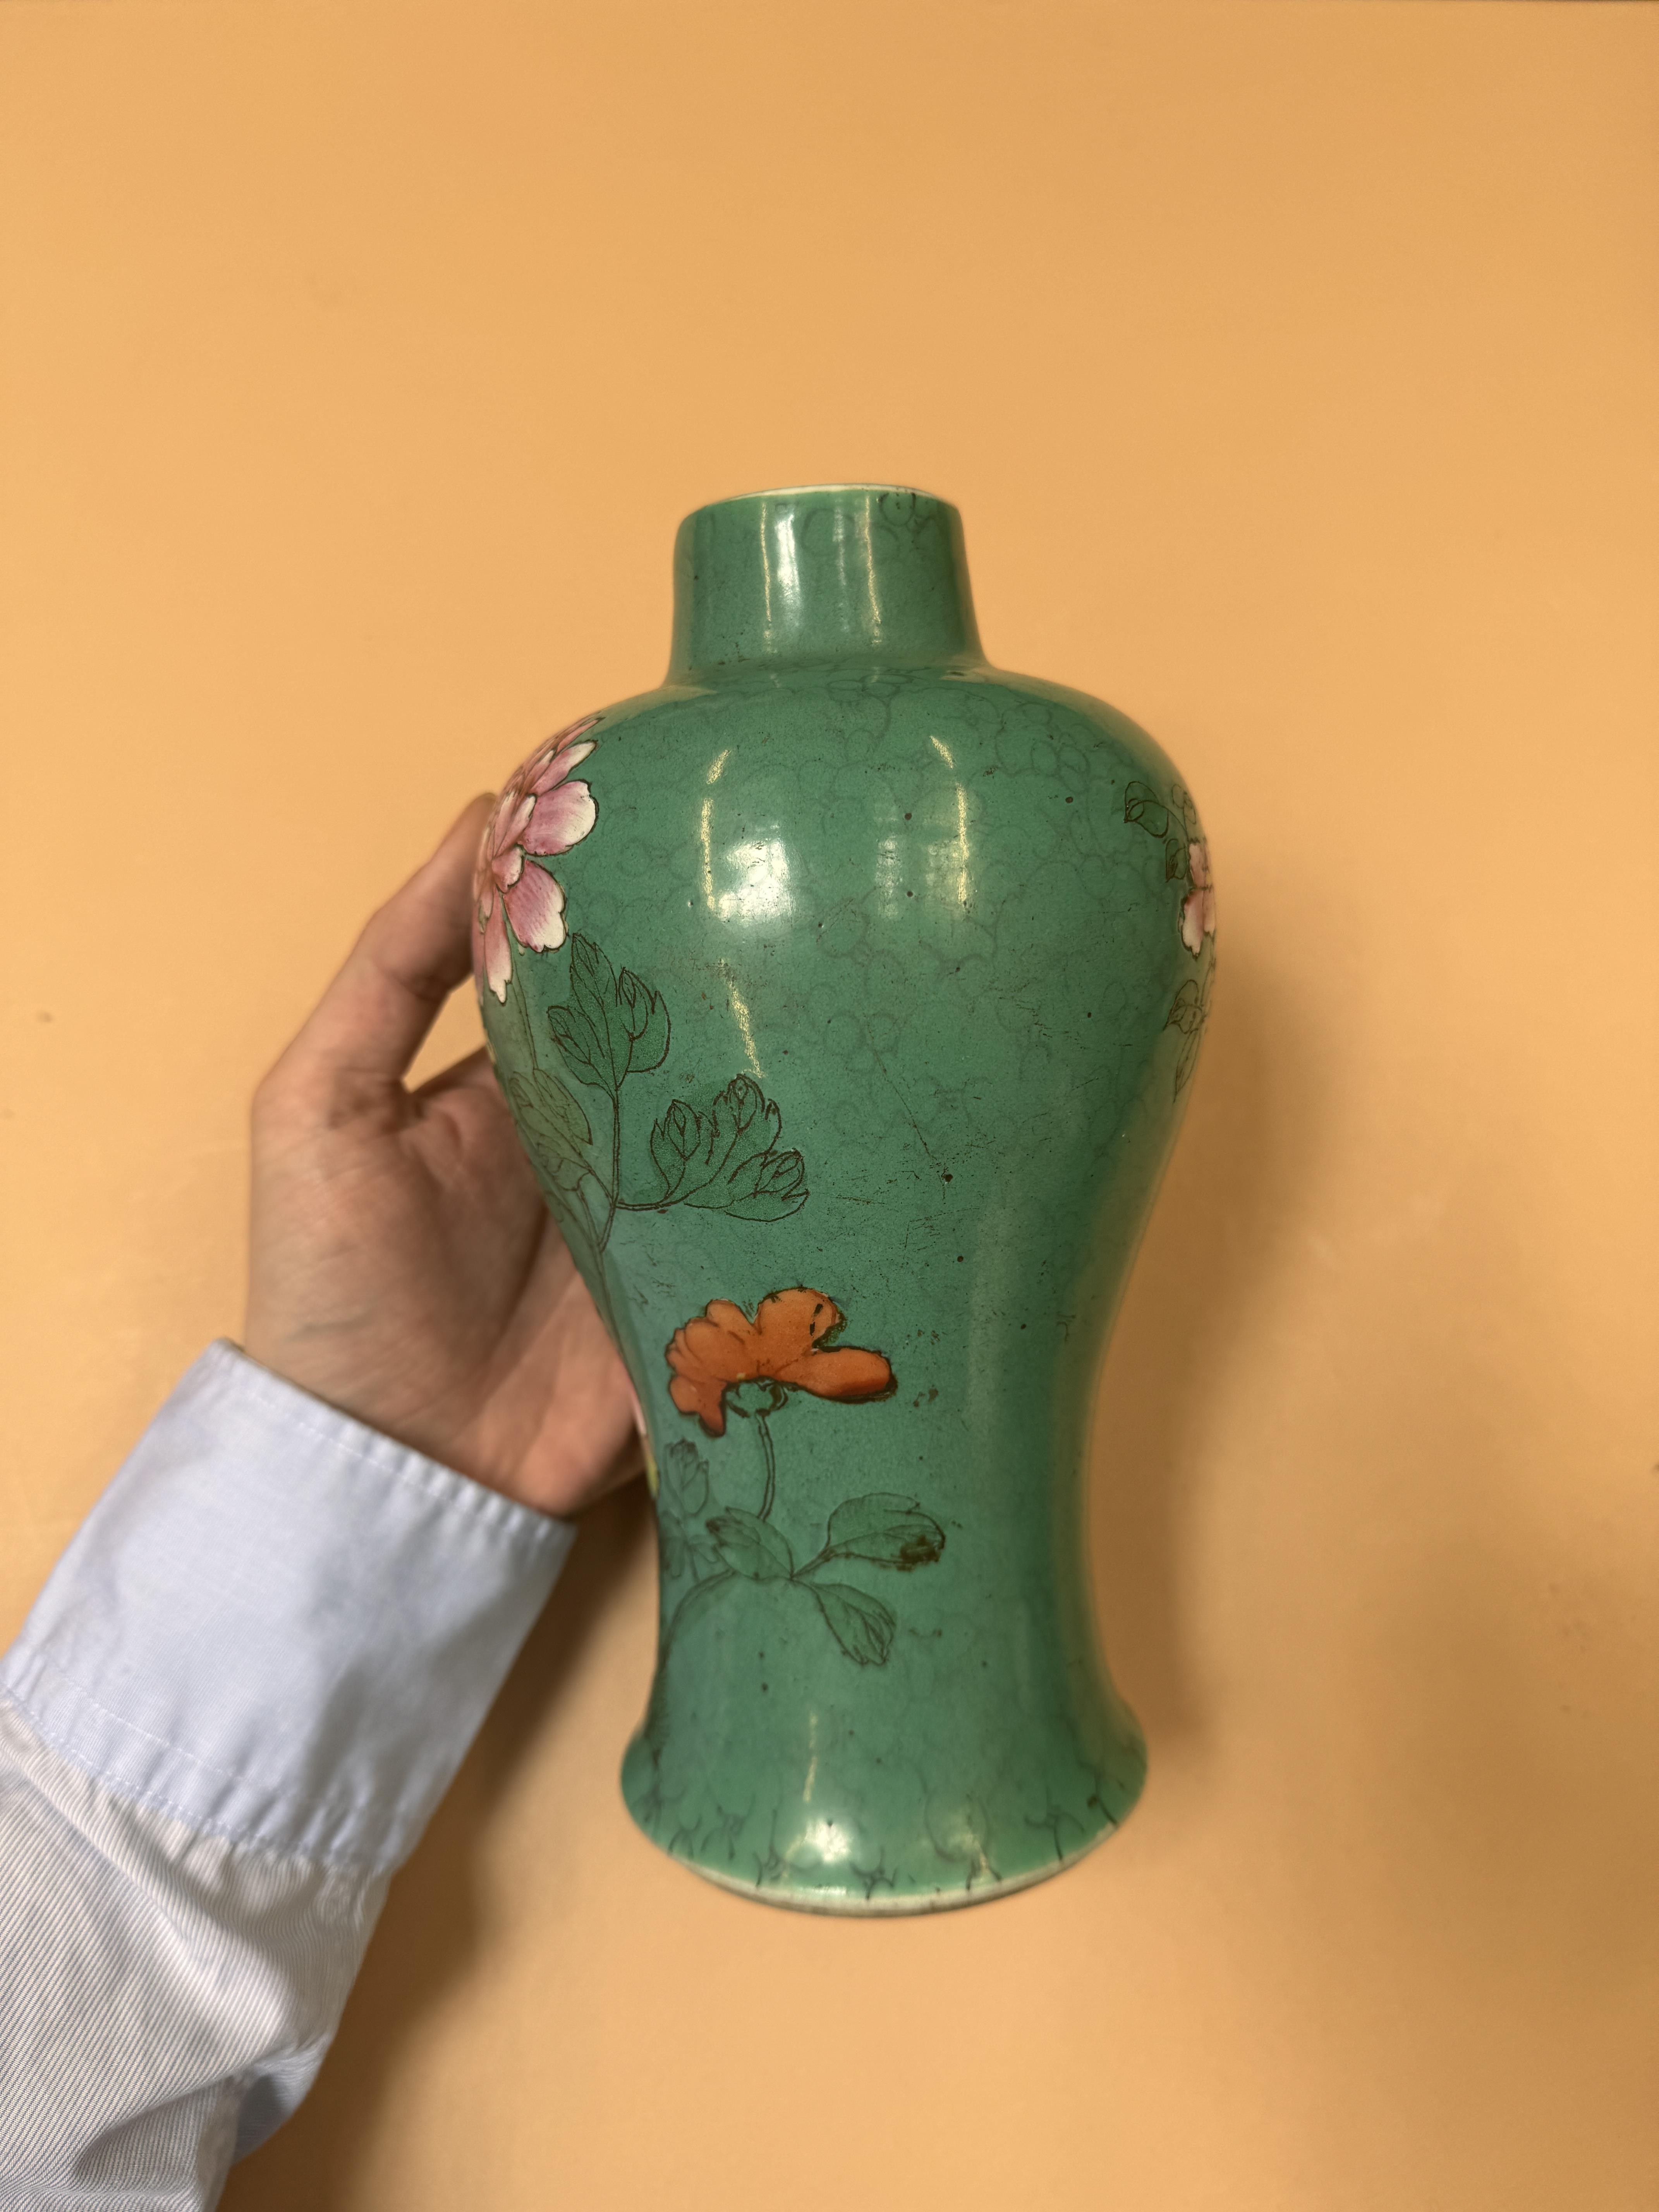 A CHINESE FAMILLE-ROSE 'PHOENIX' VASE FOR THE STRAITS OR PERANAKAN MARKET 清十八世紀 粉彩松石綠地穿花鳳紋瓶 - Image 10 of 11